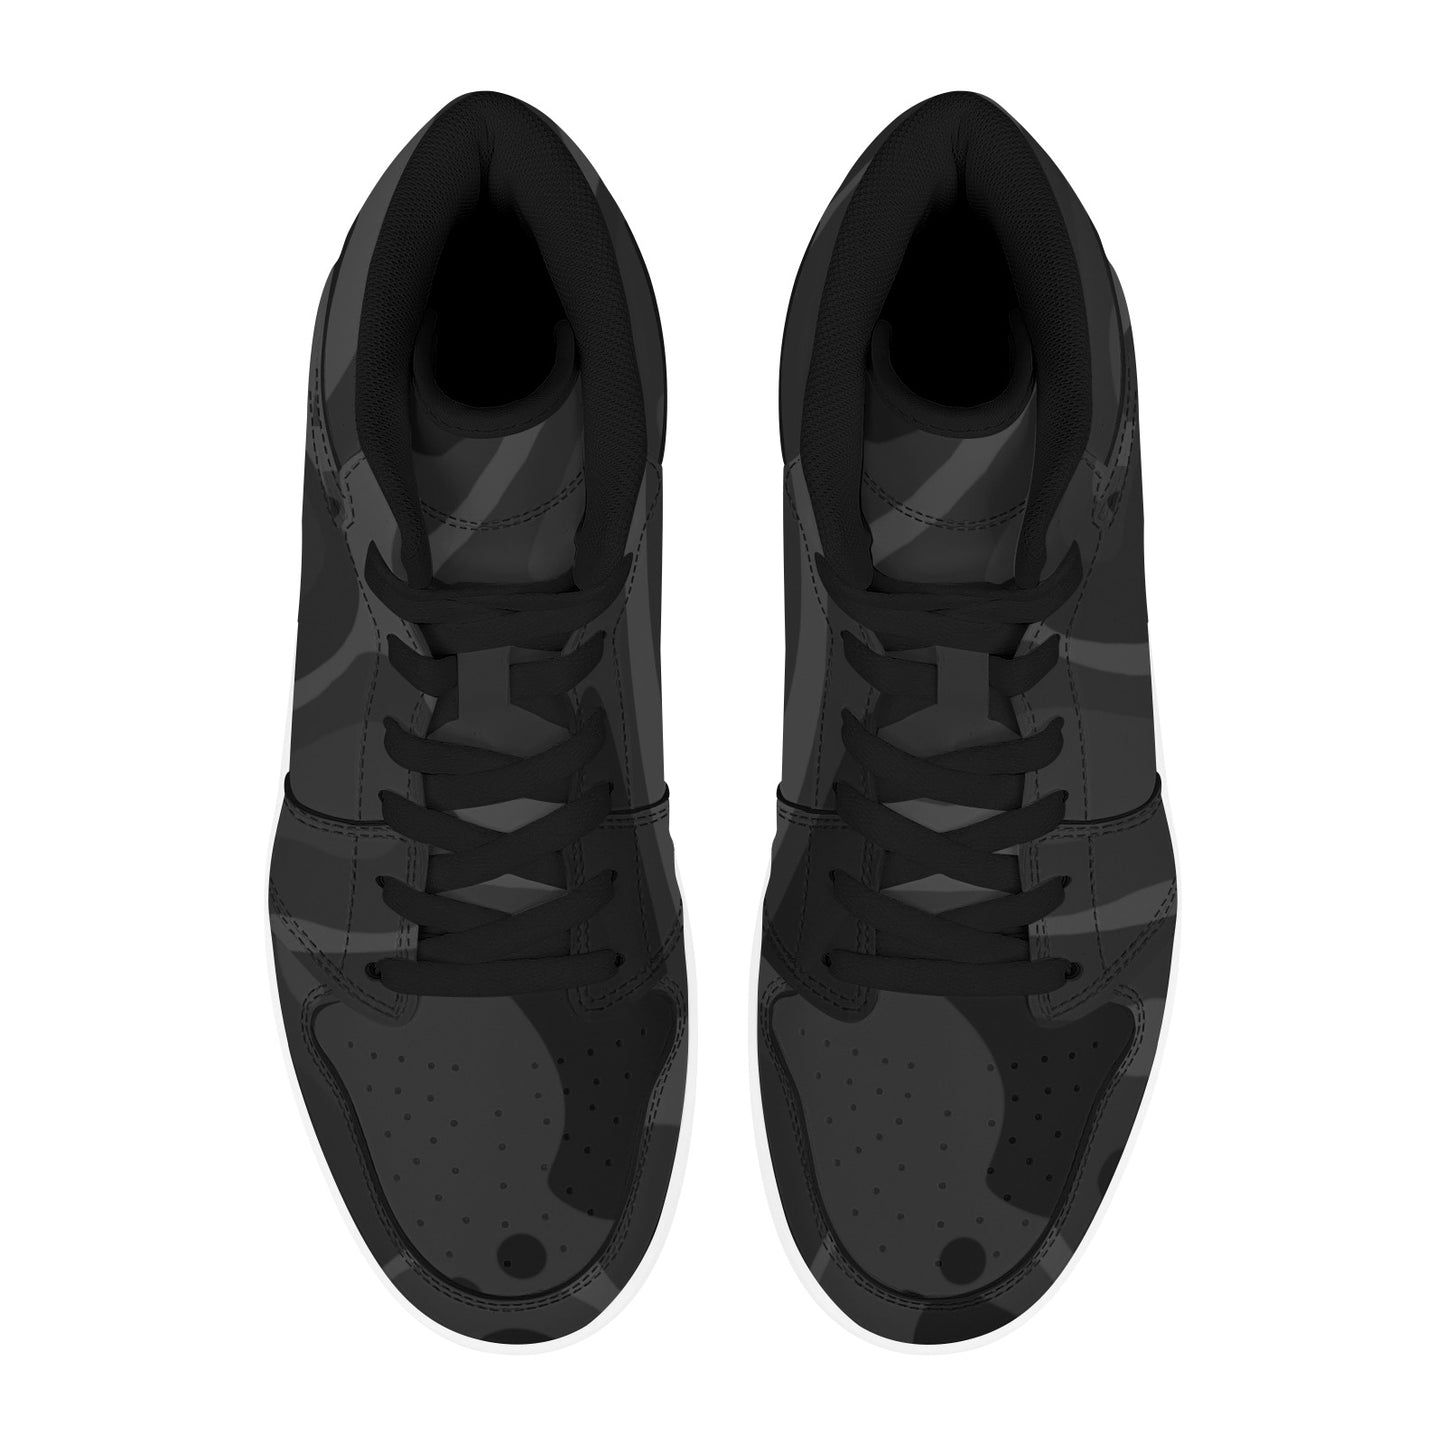 Black High Top Sneakers Abstract Black Pattern High Top Sneakers Men High Top Sneakers